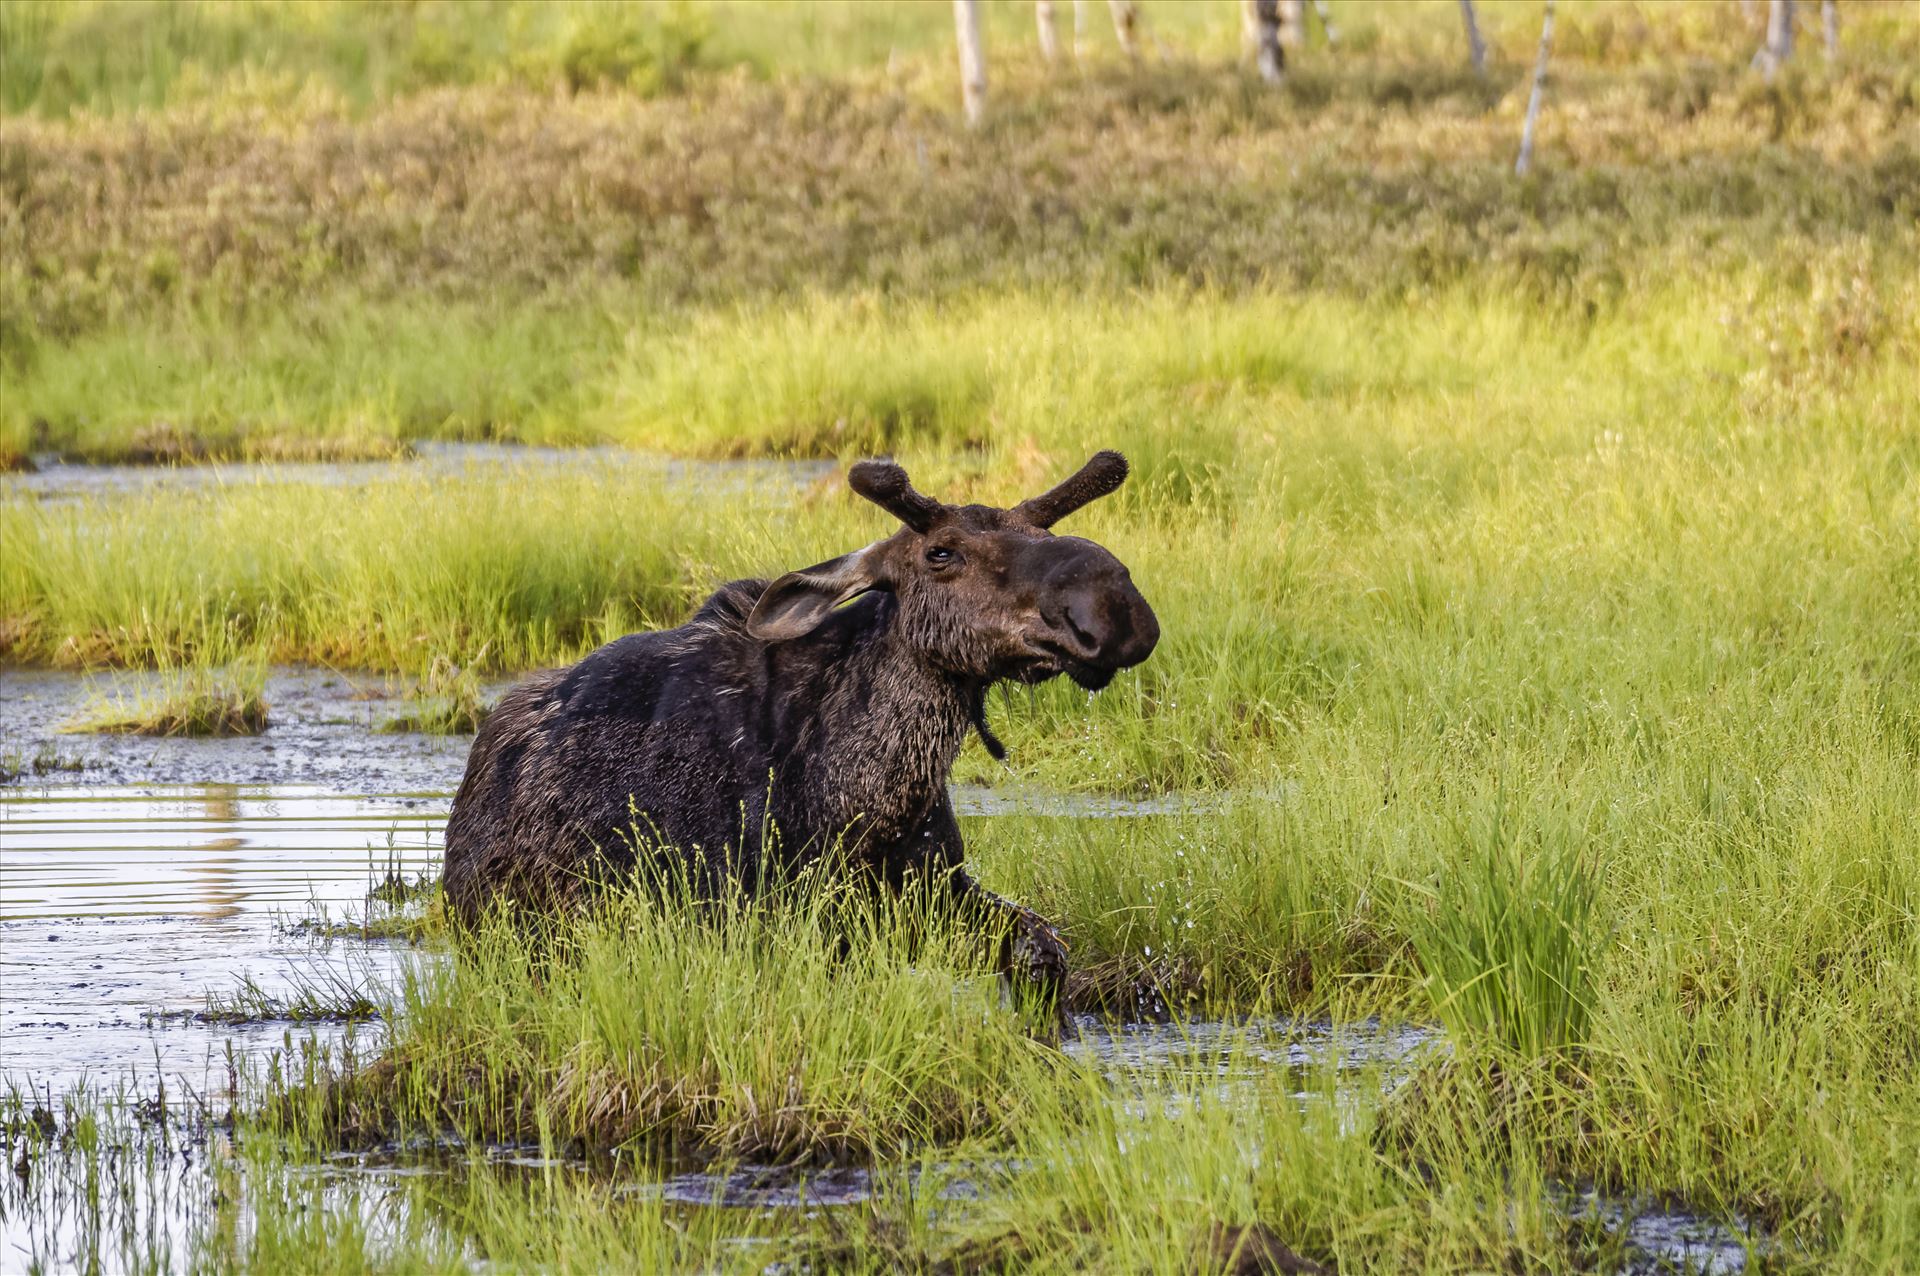 Moose in the Bog Small Bull Moose coming out of a bog after getting tired of me photographing him by Buckmaster